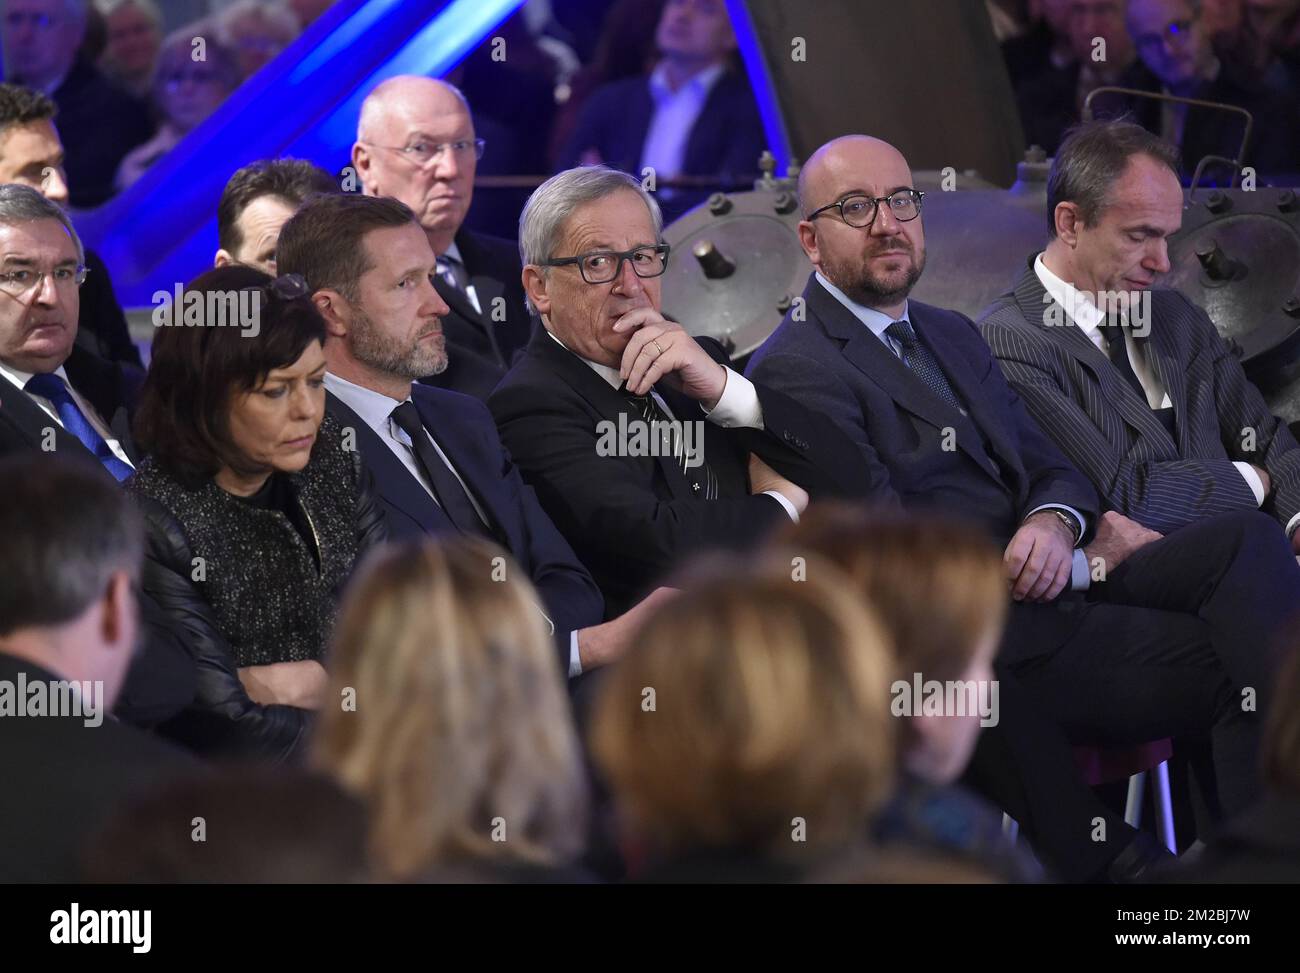 cdH's Joelle Milquet, Charleroi's mayor Paul Magnette, European Commission President Jean-Claude Juncker and Belgian Prime Minister Charles Michel attend a tribute ceremony for cdH politician Philippe Maystadt at the Bois du Casier in Marcinelle, Monday 11 December 2017. BELGA PHOTO JOHN THYS Stock Photo